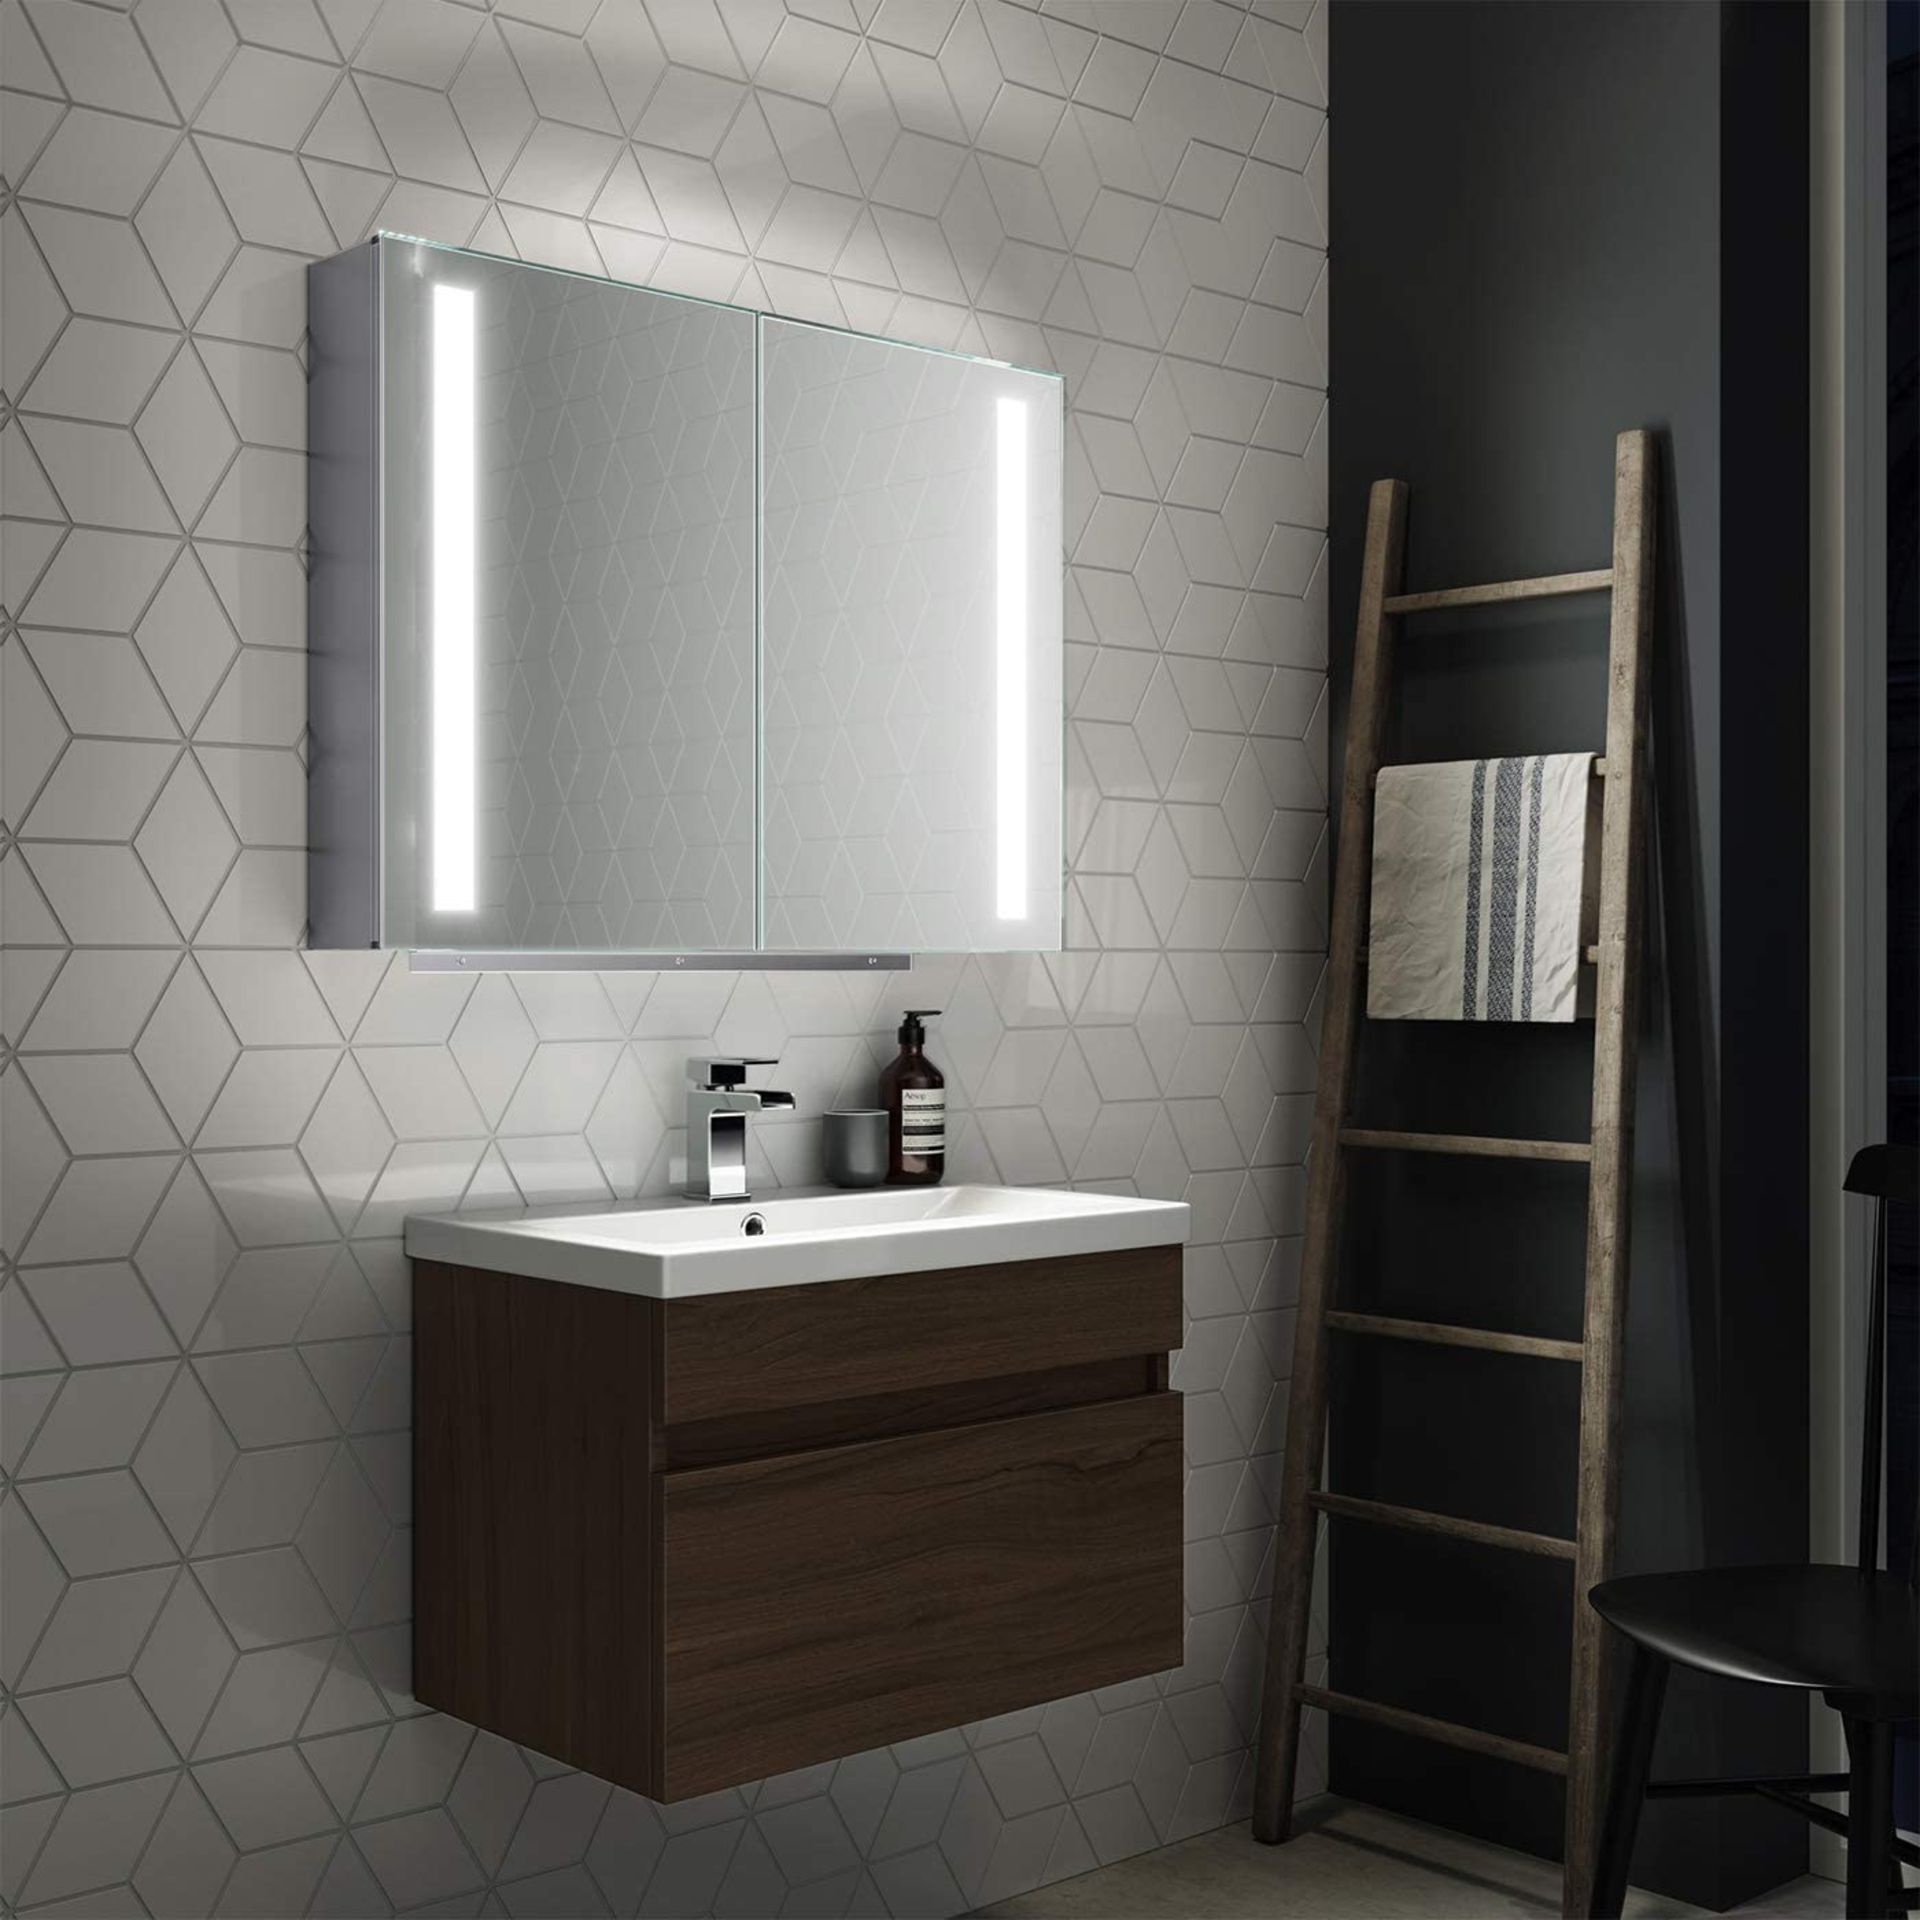 NEW 800x600 Dawn Illuminated LED Mirror Cabinet. RRP £939.99.MC164.We love this mirror cabine... - Image 2 of 3